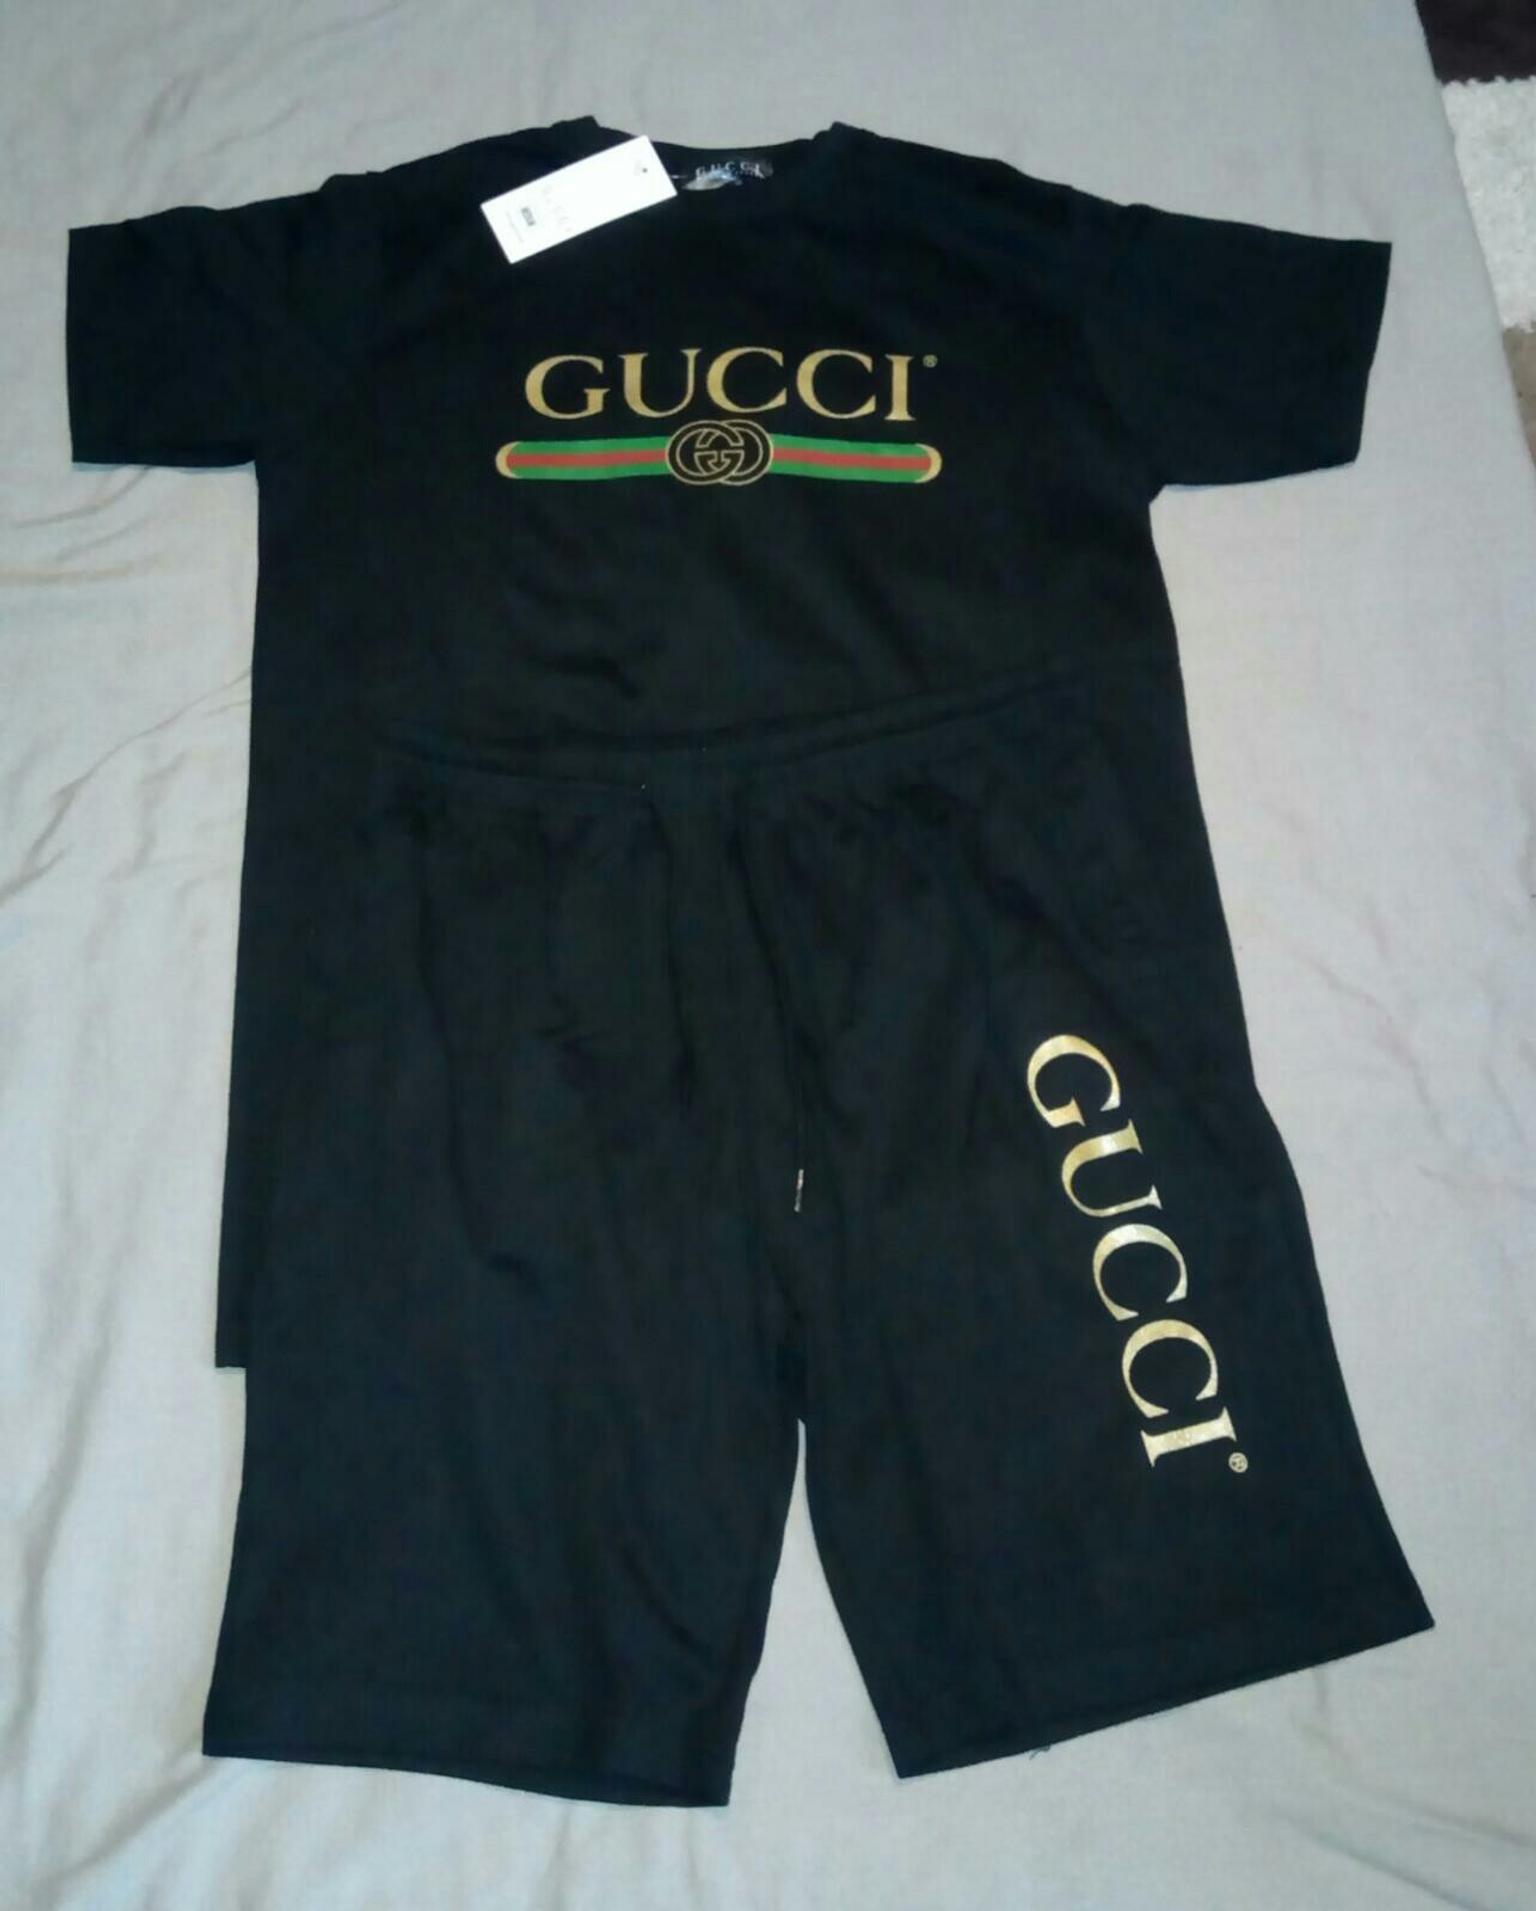 Gucci shorts and T-shirt sets in PO11 Havant for £25.00 for sale | Shpock